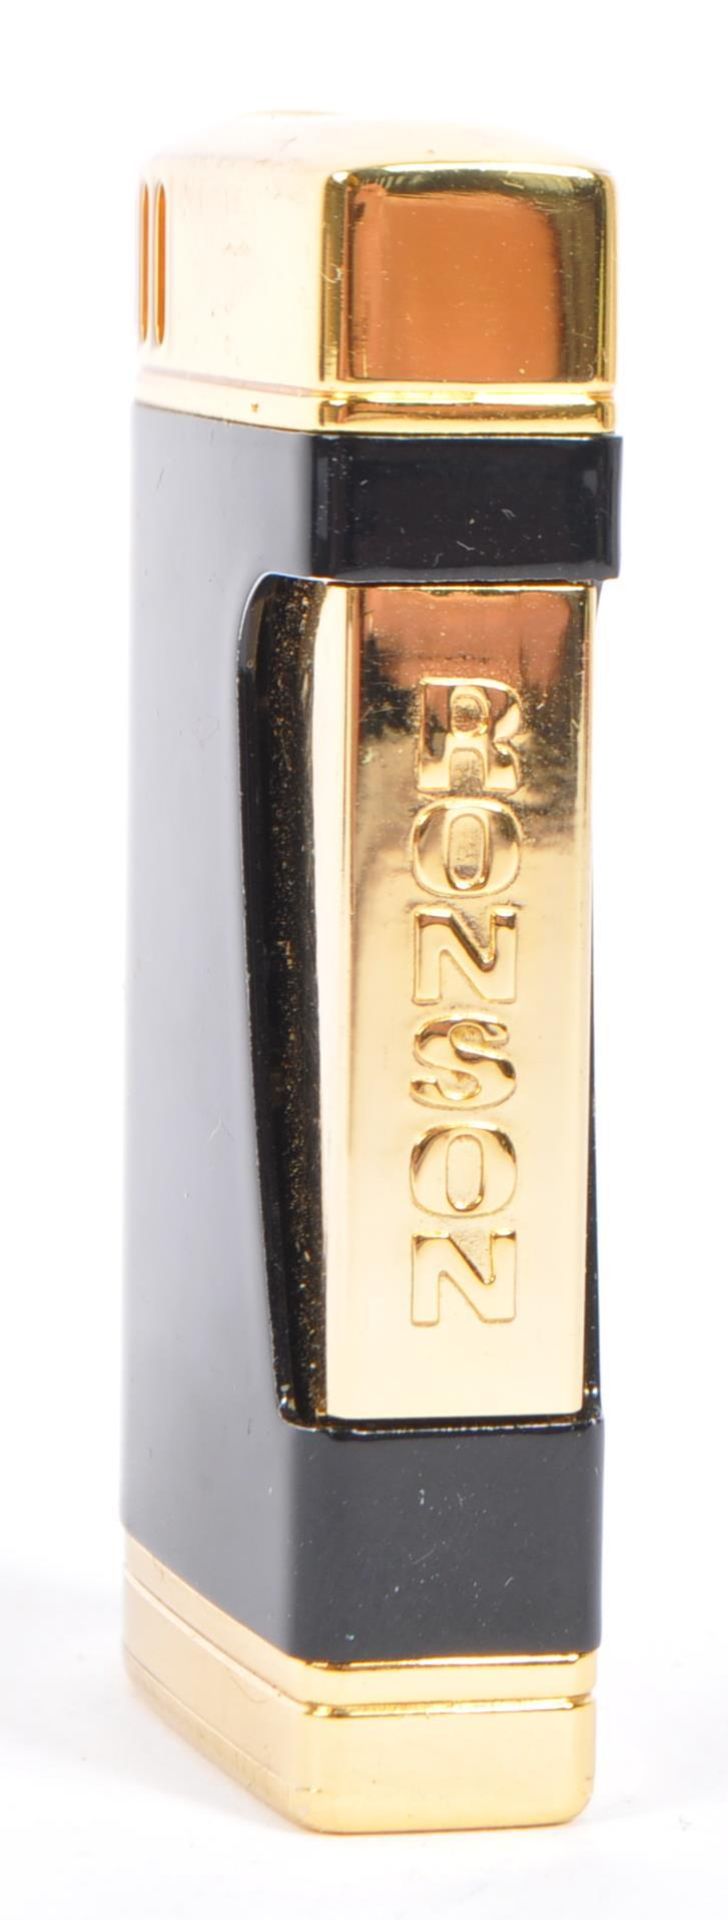 CONTEMPORARY ENGLISH RONSON ELECTRIC LIGHTER - Image 3 of 5